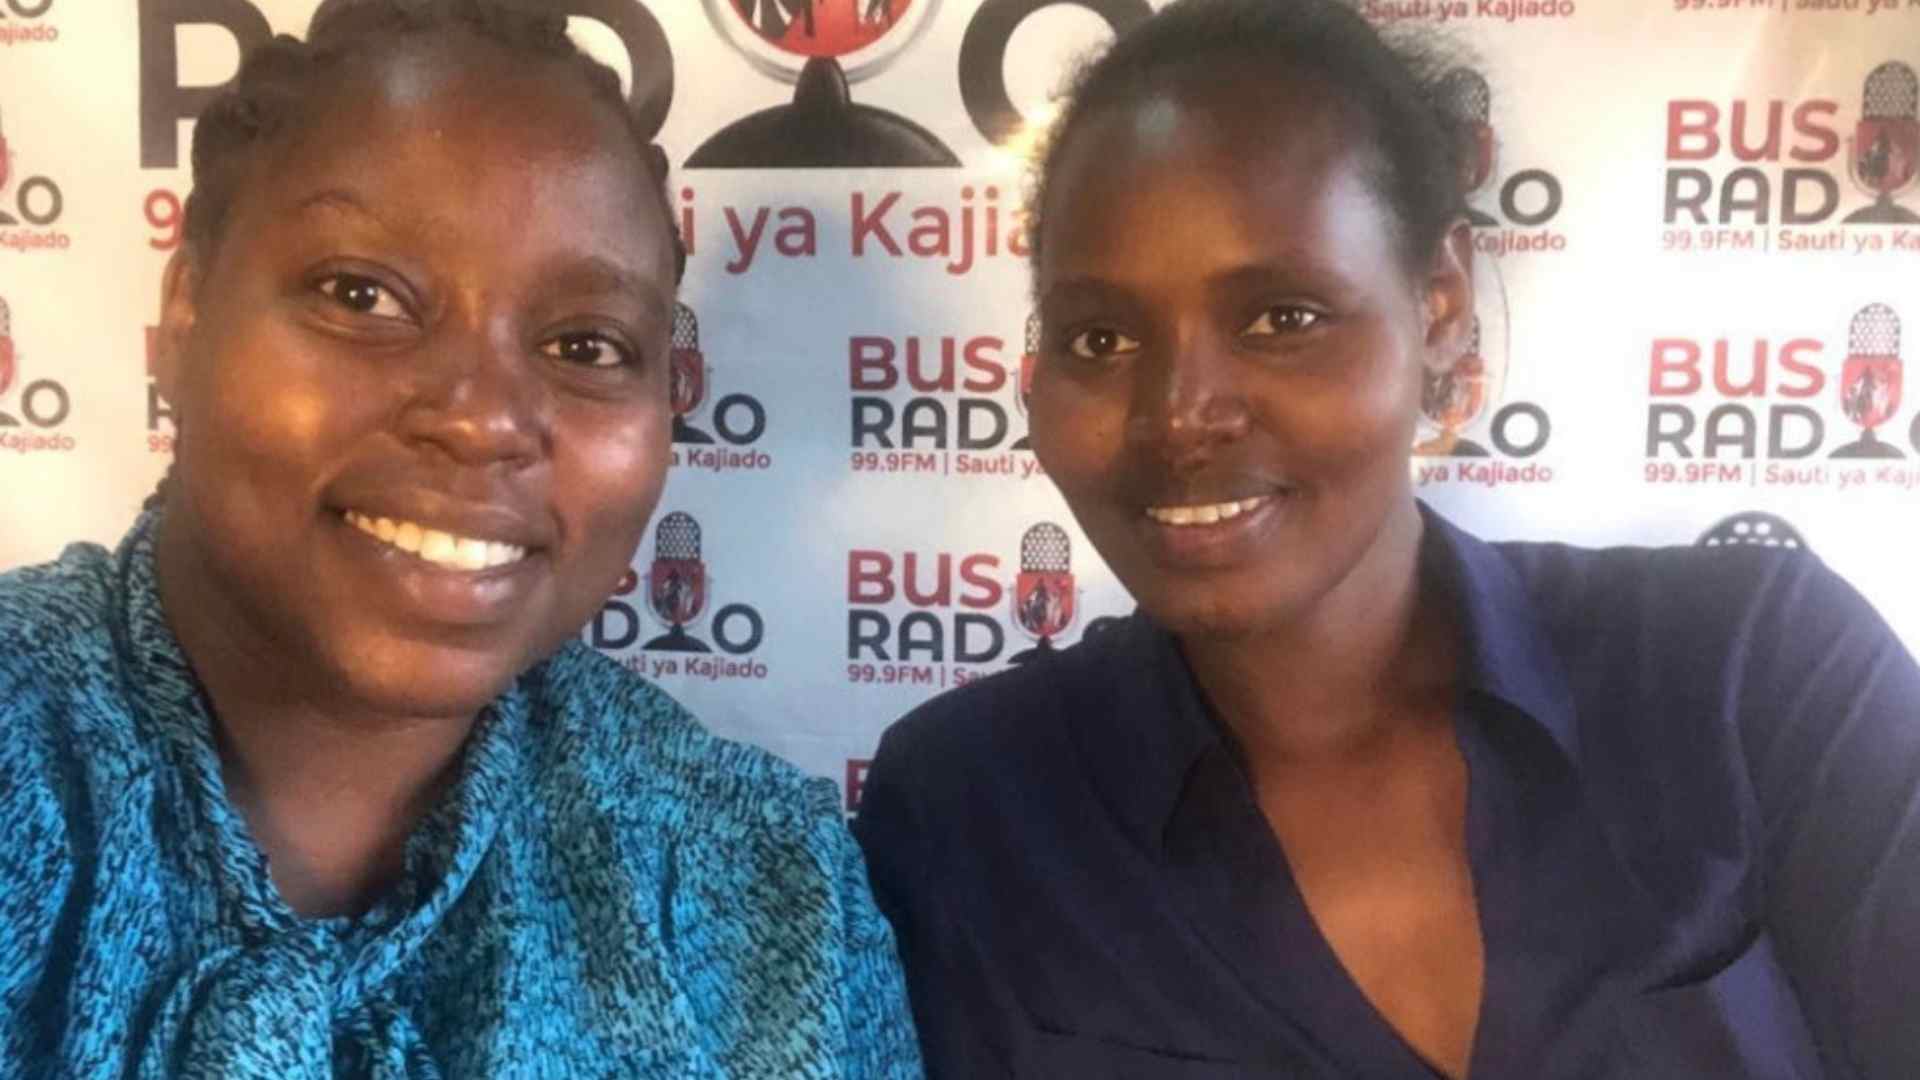 You are currently viewing Radio conversations reveal that Drought now leading to more FGM and Child Marriage, Kajaido County, Kenya